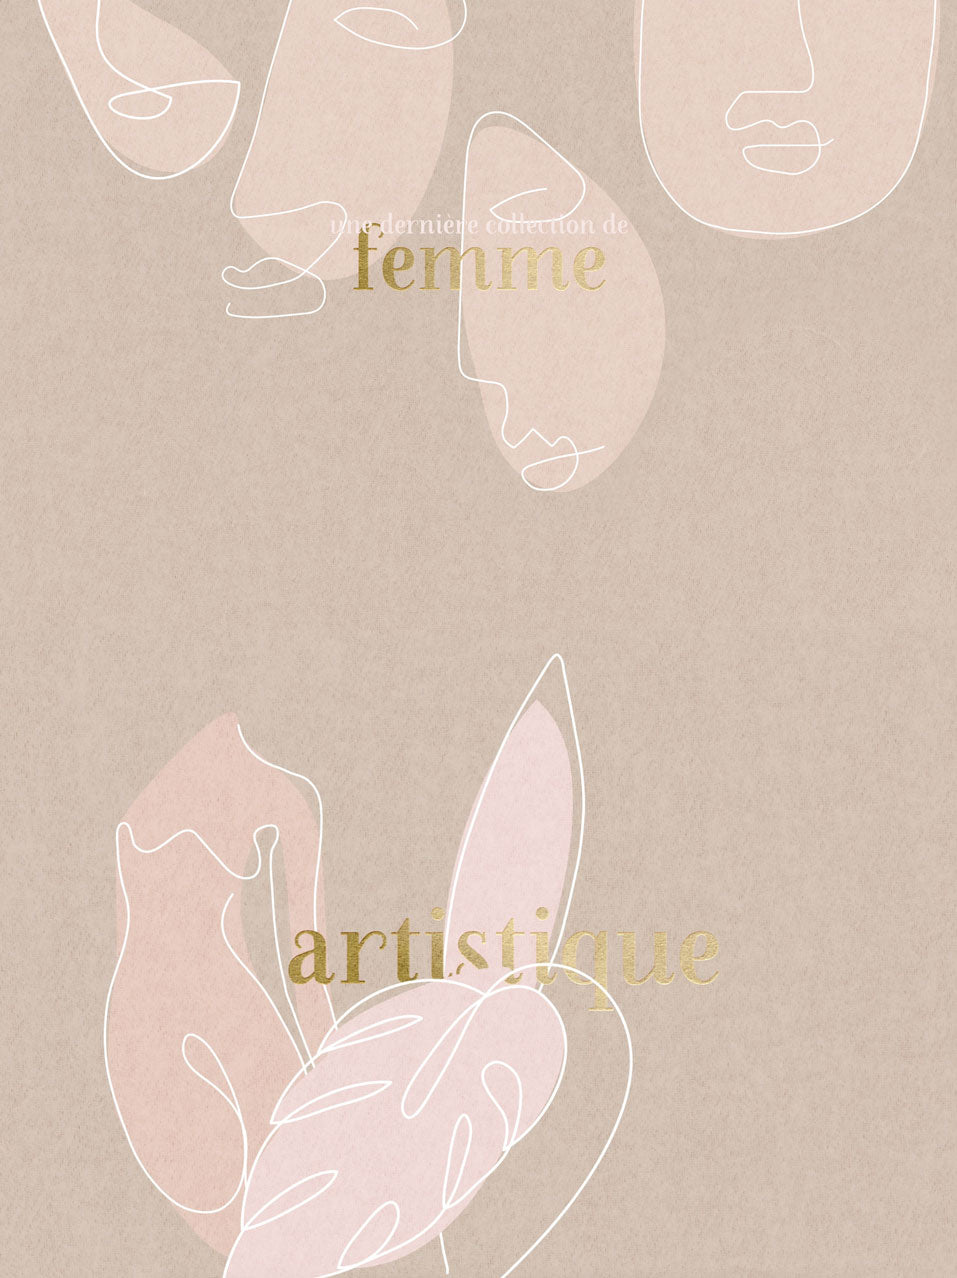 Animated Abstract | Femme One Line - ANA & YVY